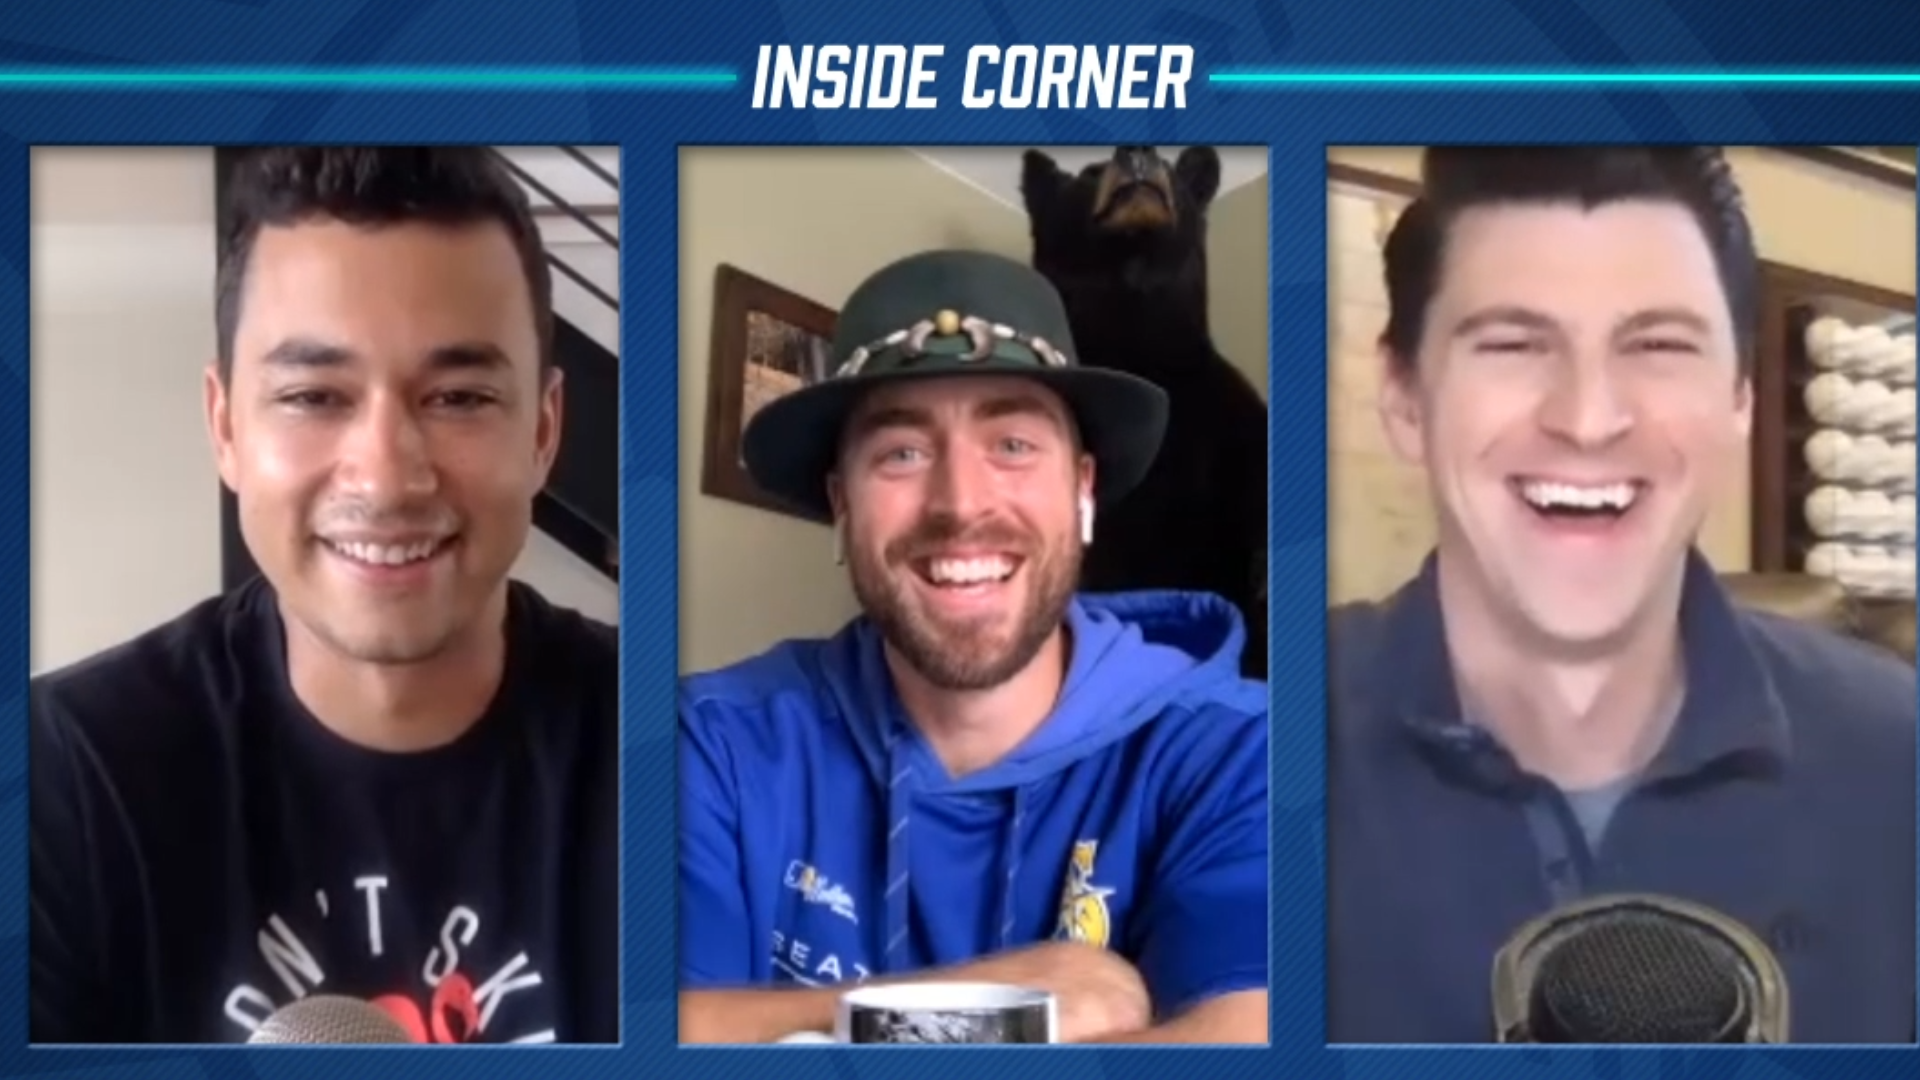 Starting pitcher Marco Gonzales and Mariners broadcaster Aaron Goldsmith host Inside Corner on Seattle Mariners YouTube channel. The only guests are the players!